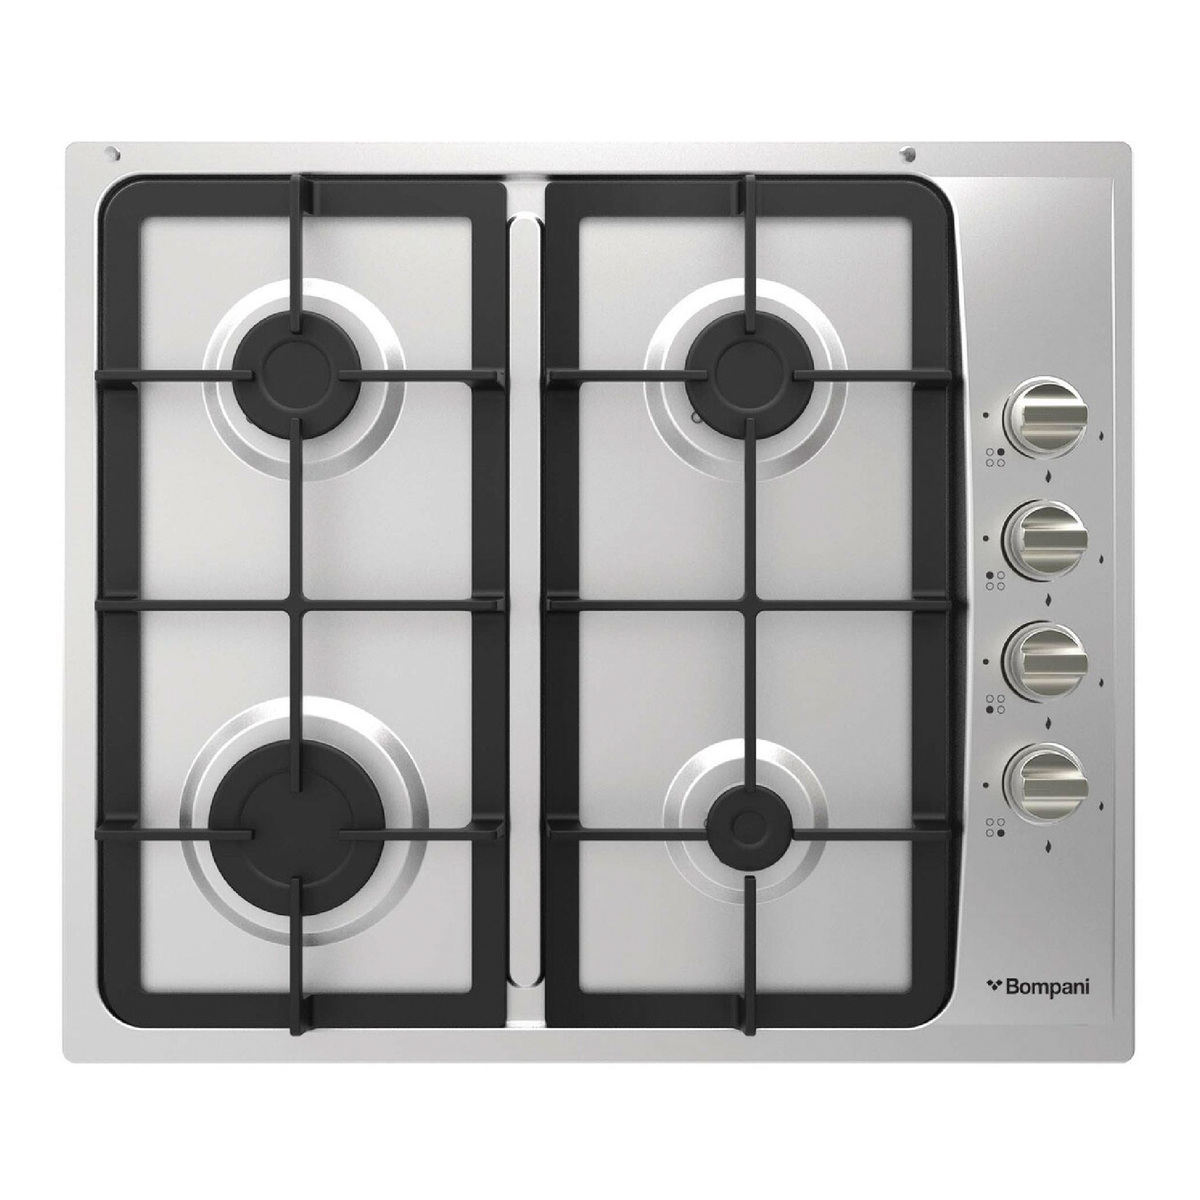 Bompani Cooking Gas Hob with 4 Gas Burners, 60 cm, Stainless Steel, BO213LG